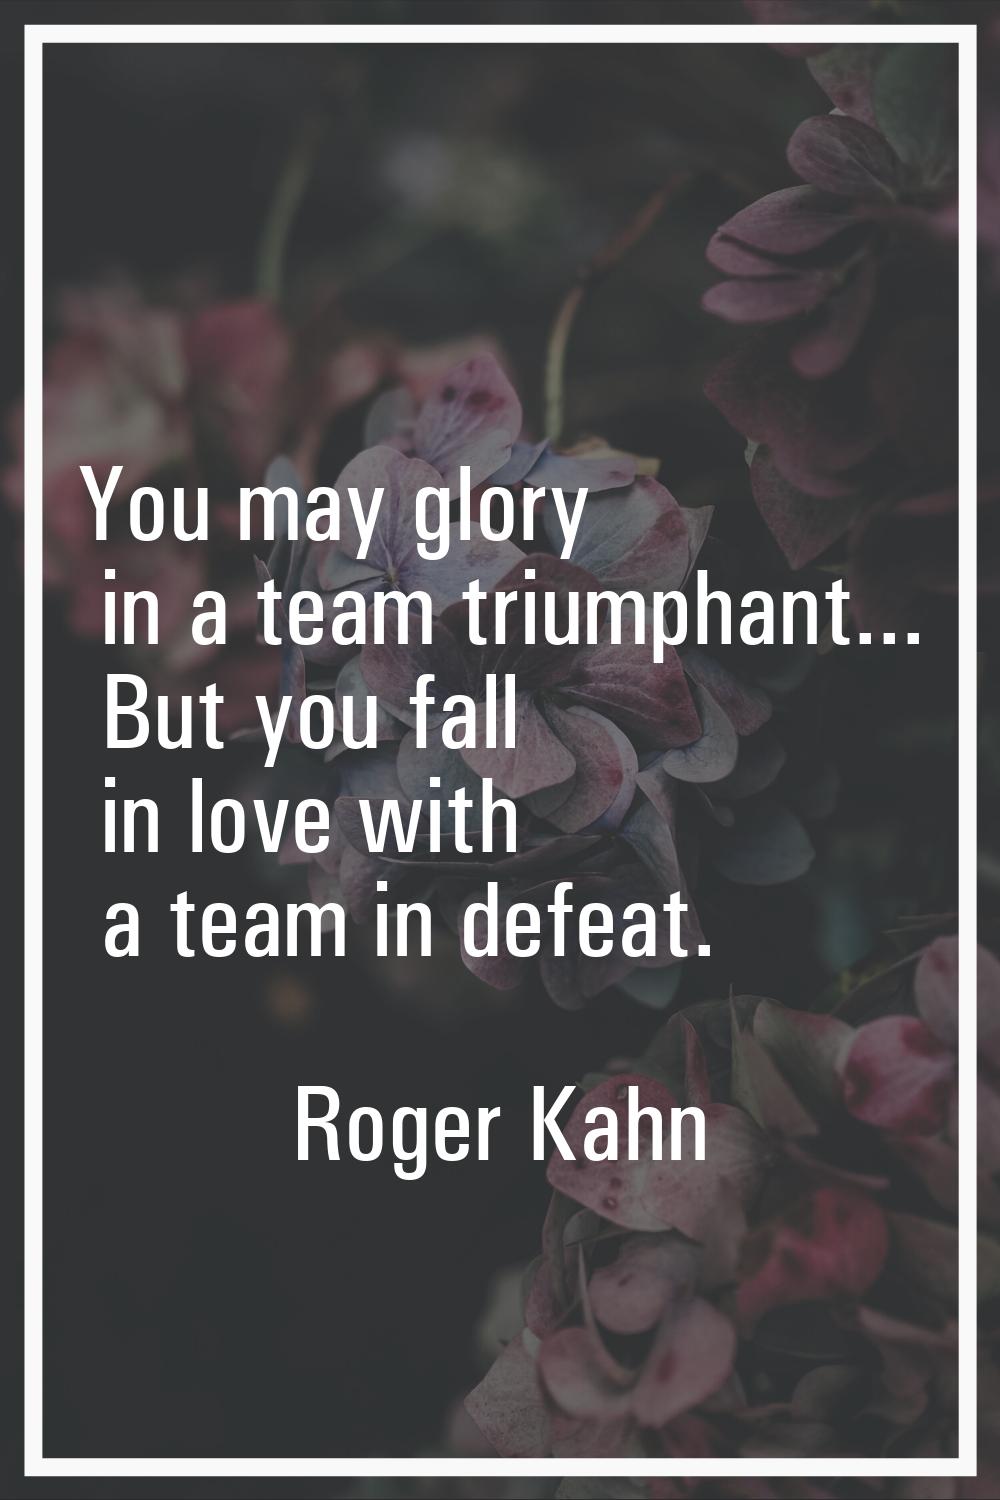 You may glory in a team triumphant... But you fall in love with a team in defeat.